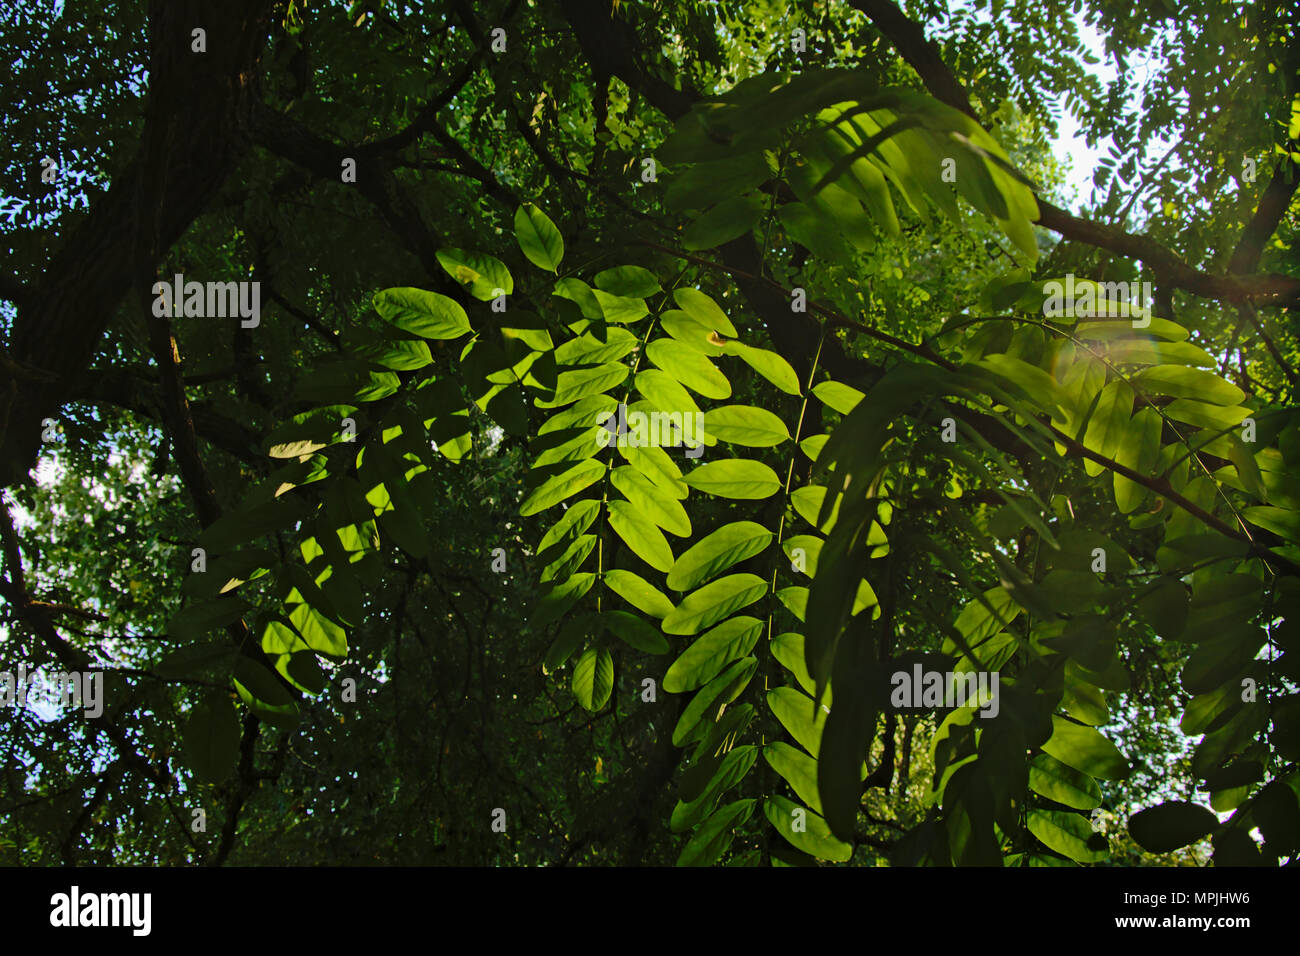 Background of black locust leafs backit by the evening light, selective focus Stock Photo